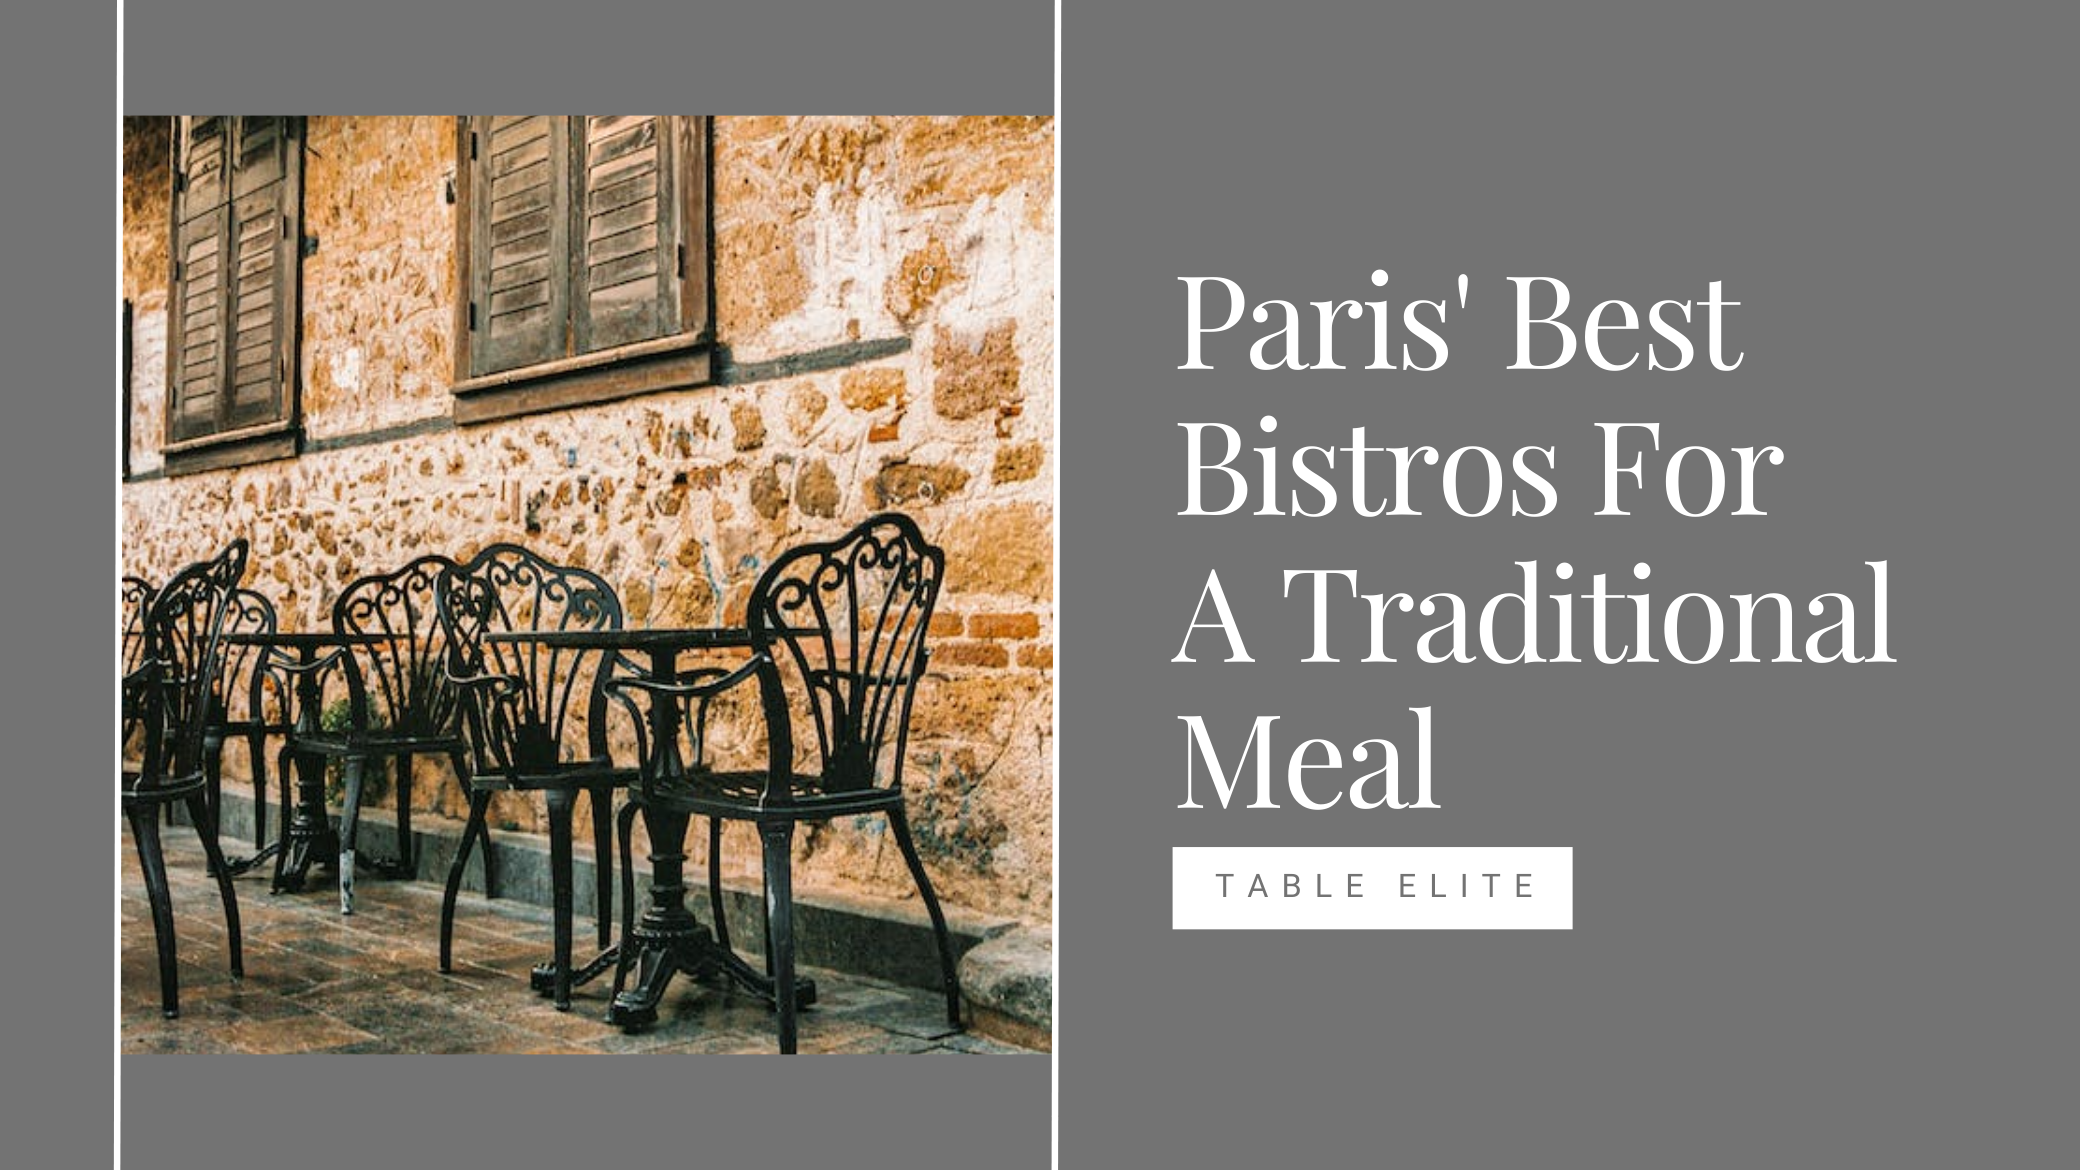 Paris Best Bistros for a traditional meal